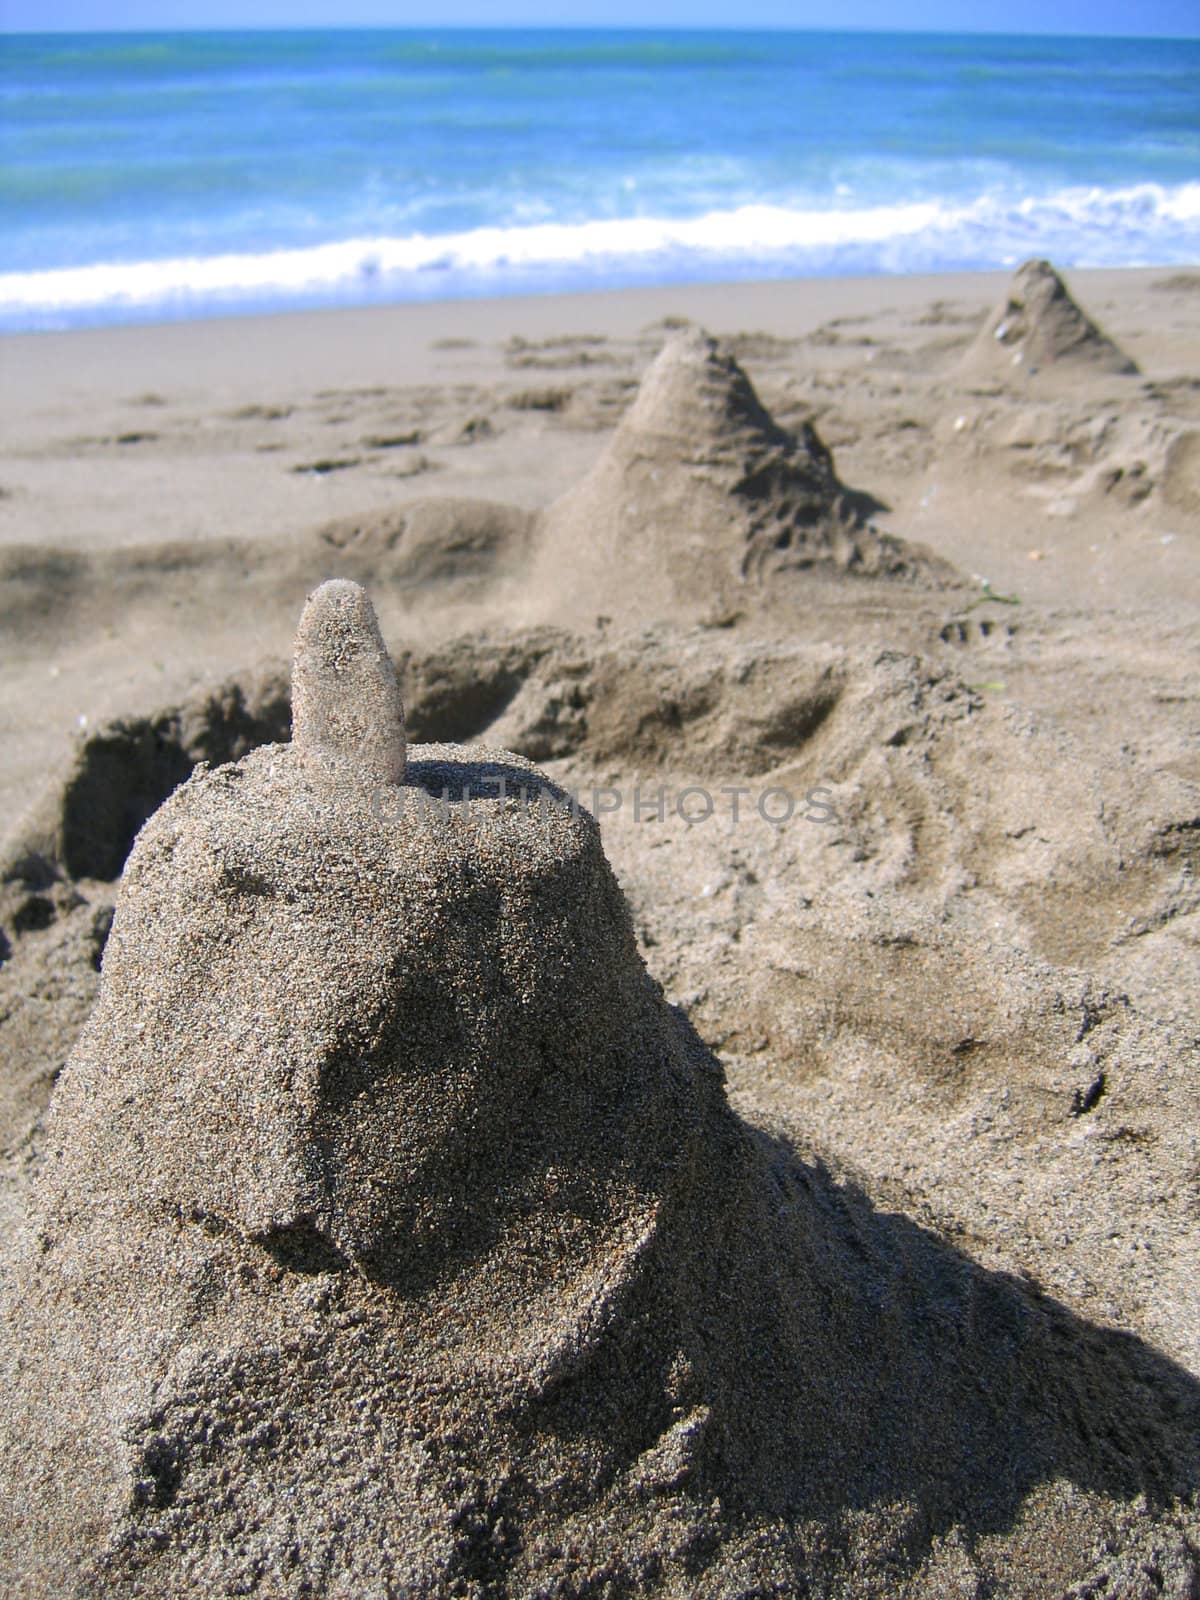 Sandcastle by Angel_a